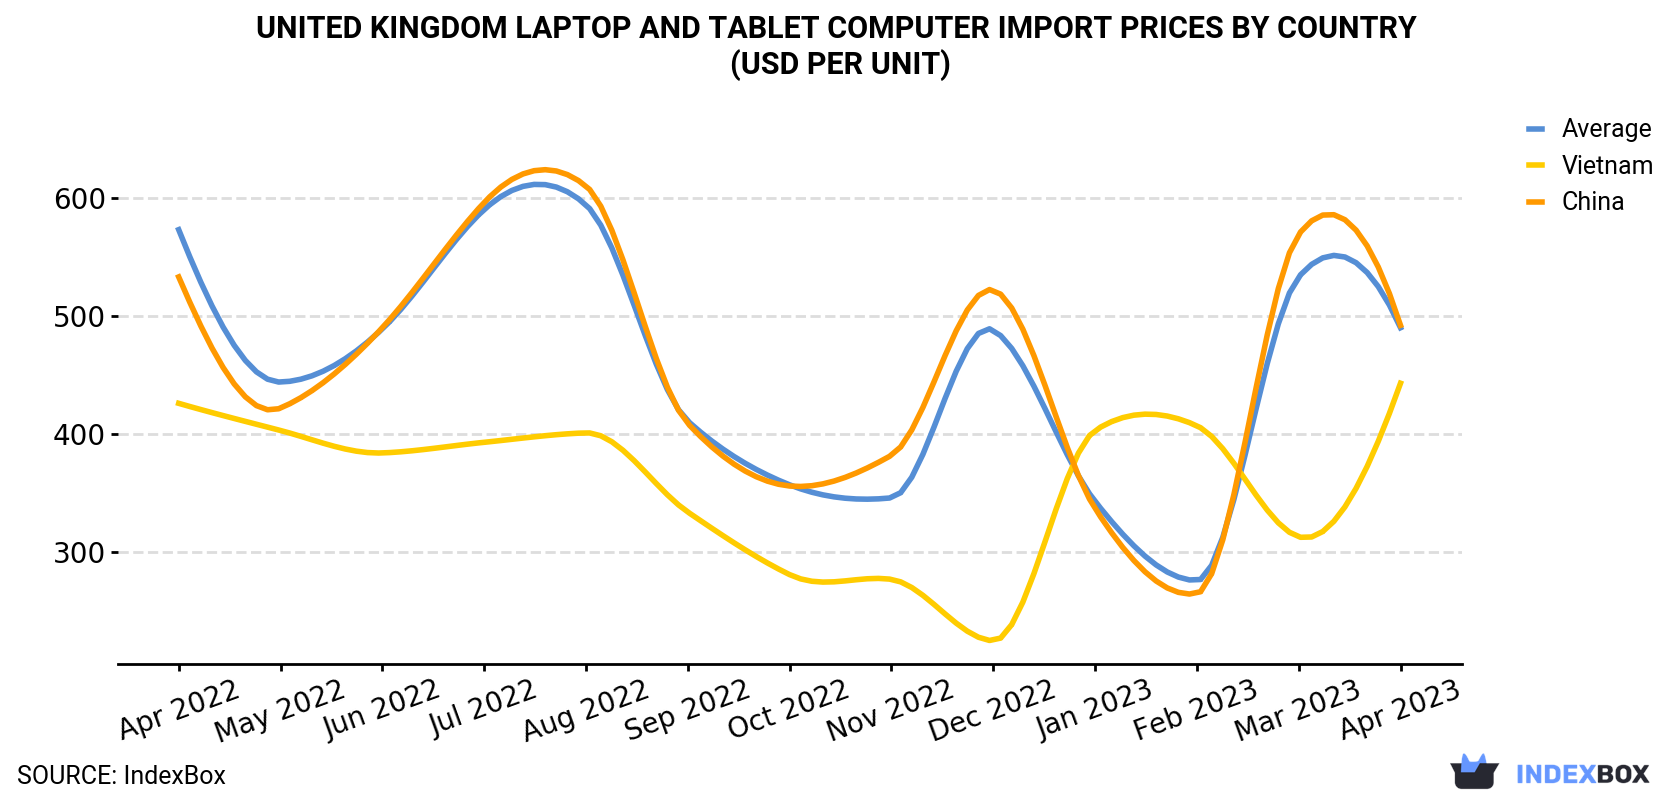 United Kingdom Laptop and Tablet Computer Import Prices By Country (USD Per Unit)